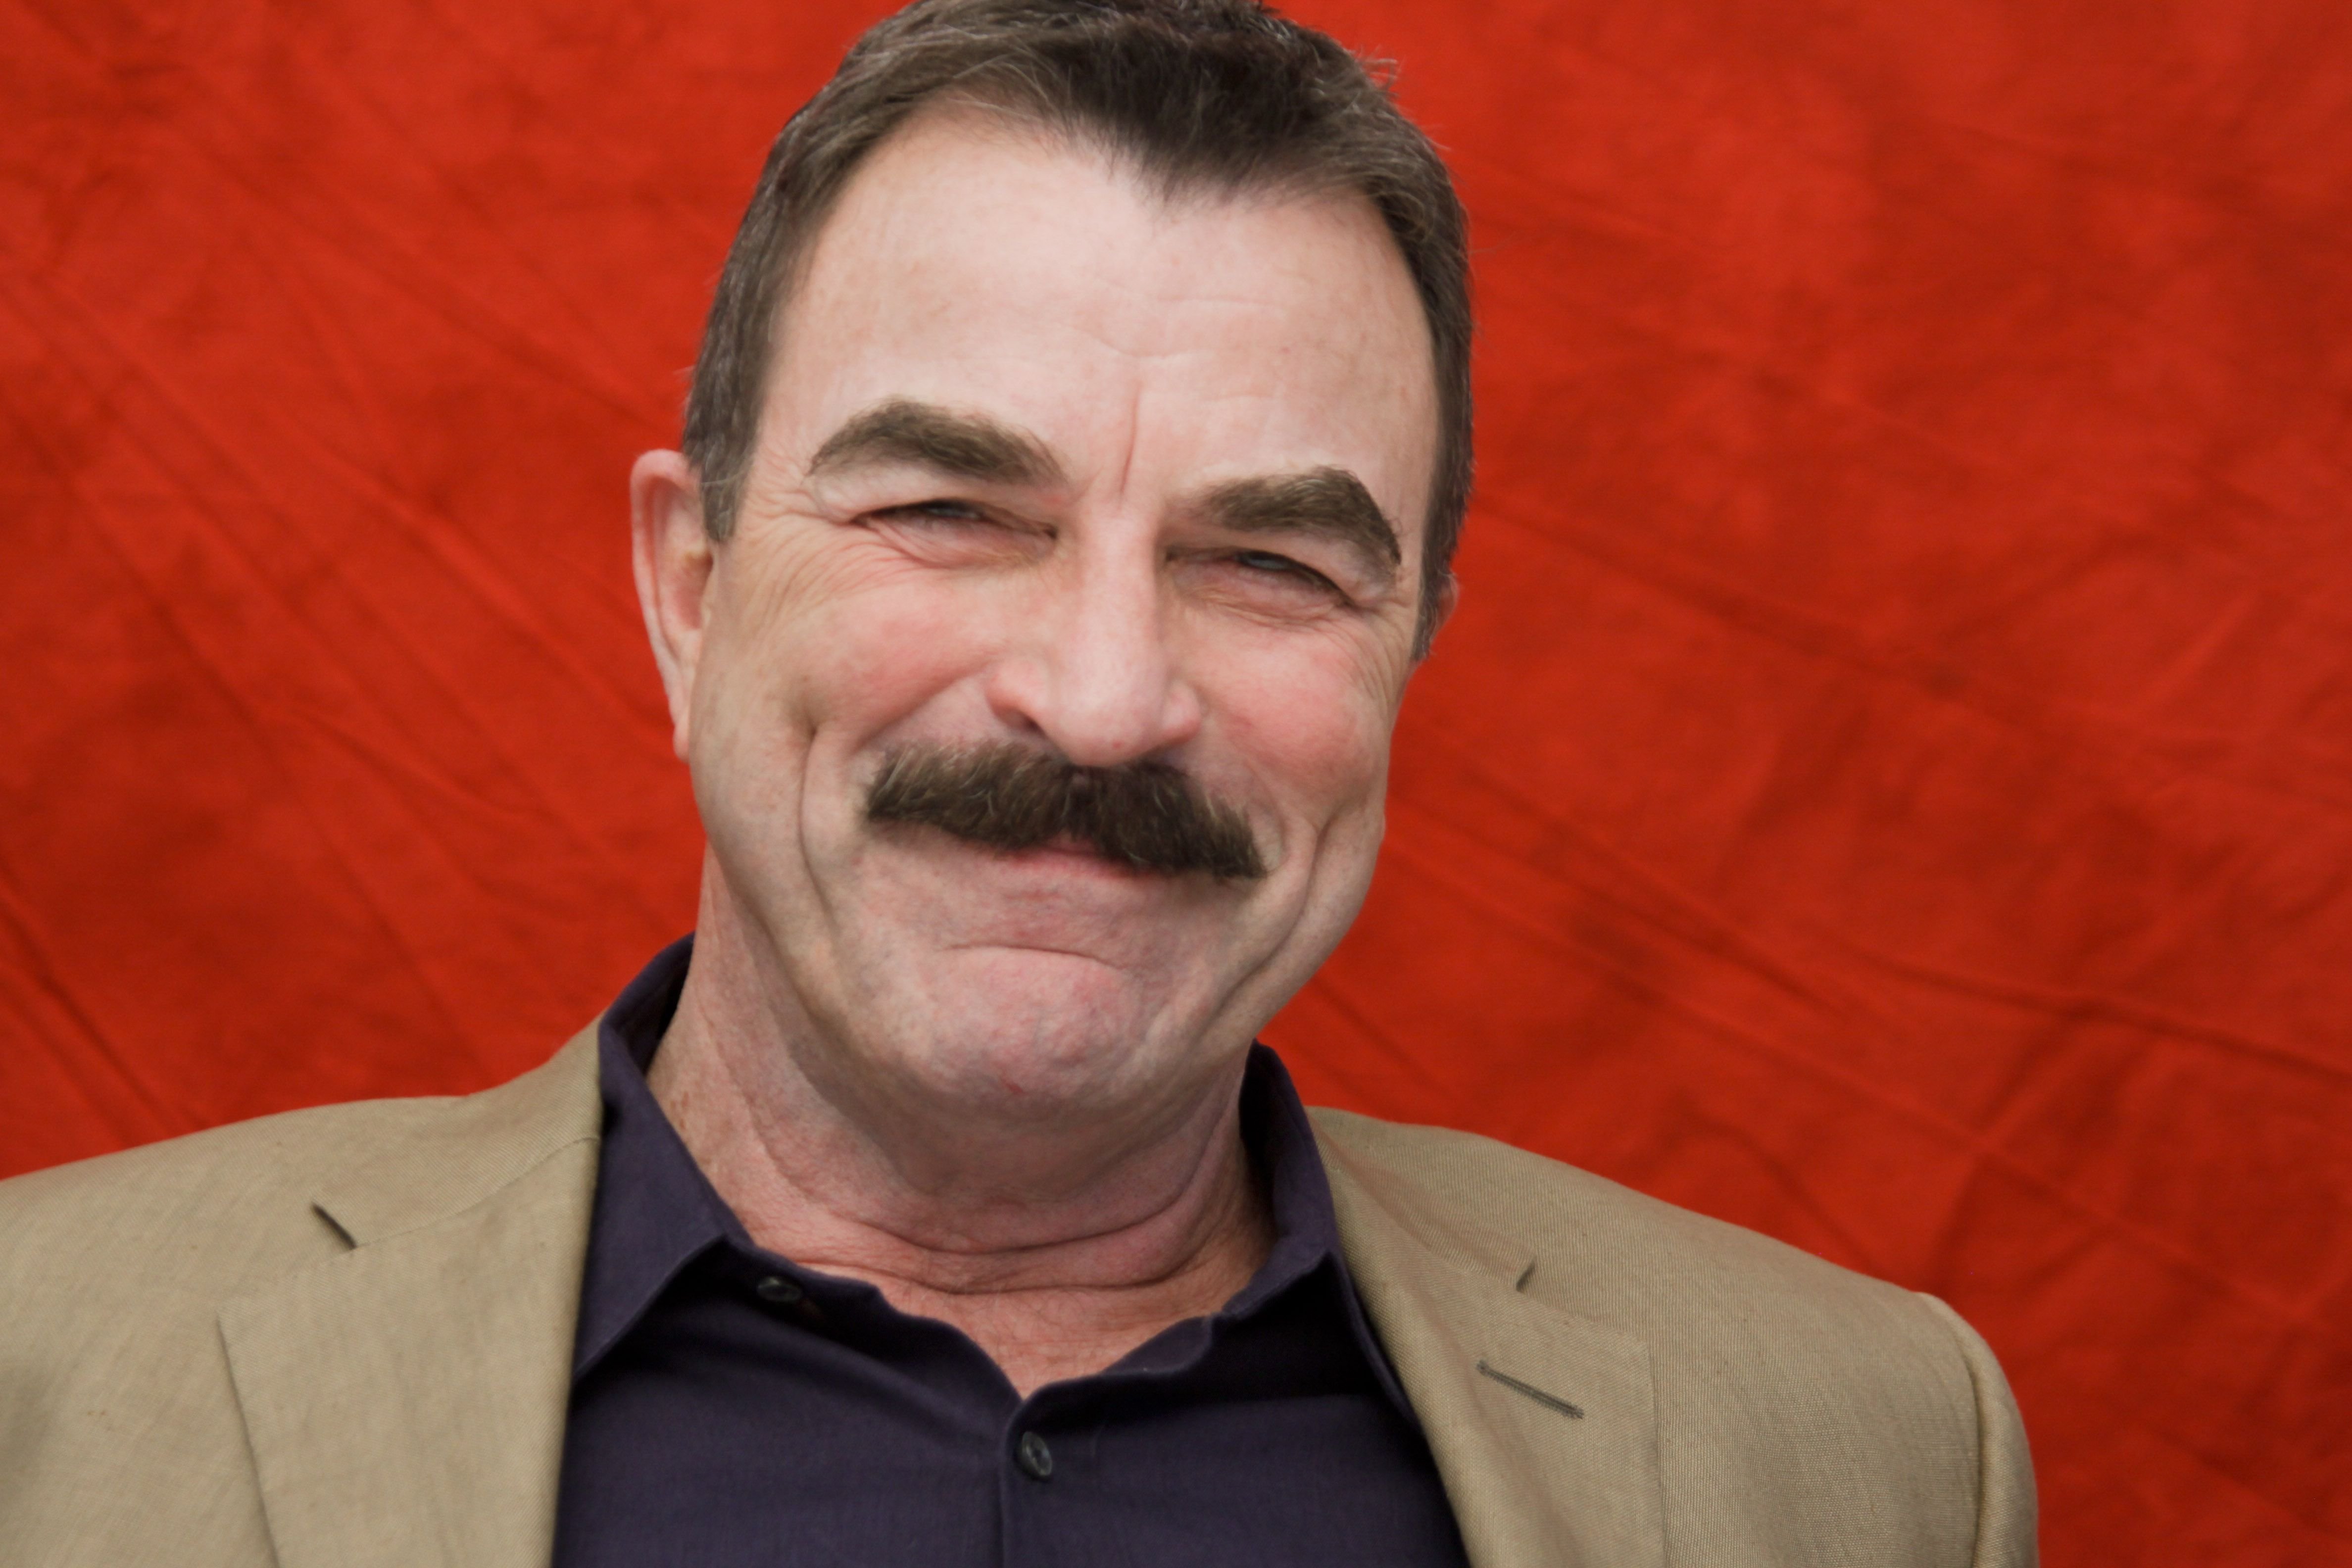 Tom Selleck poses for a photo during a portrait session in West Hollywood, California on August 16, 2010 | Photo: Getty Images